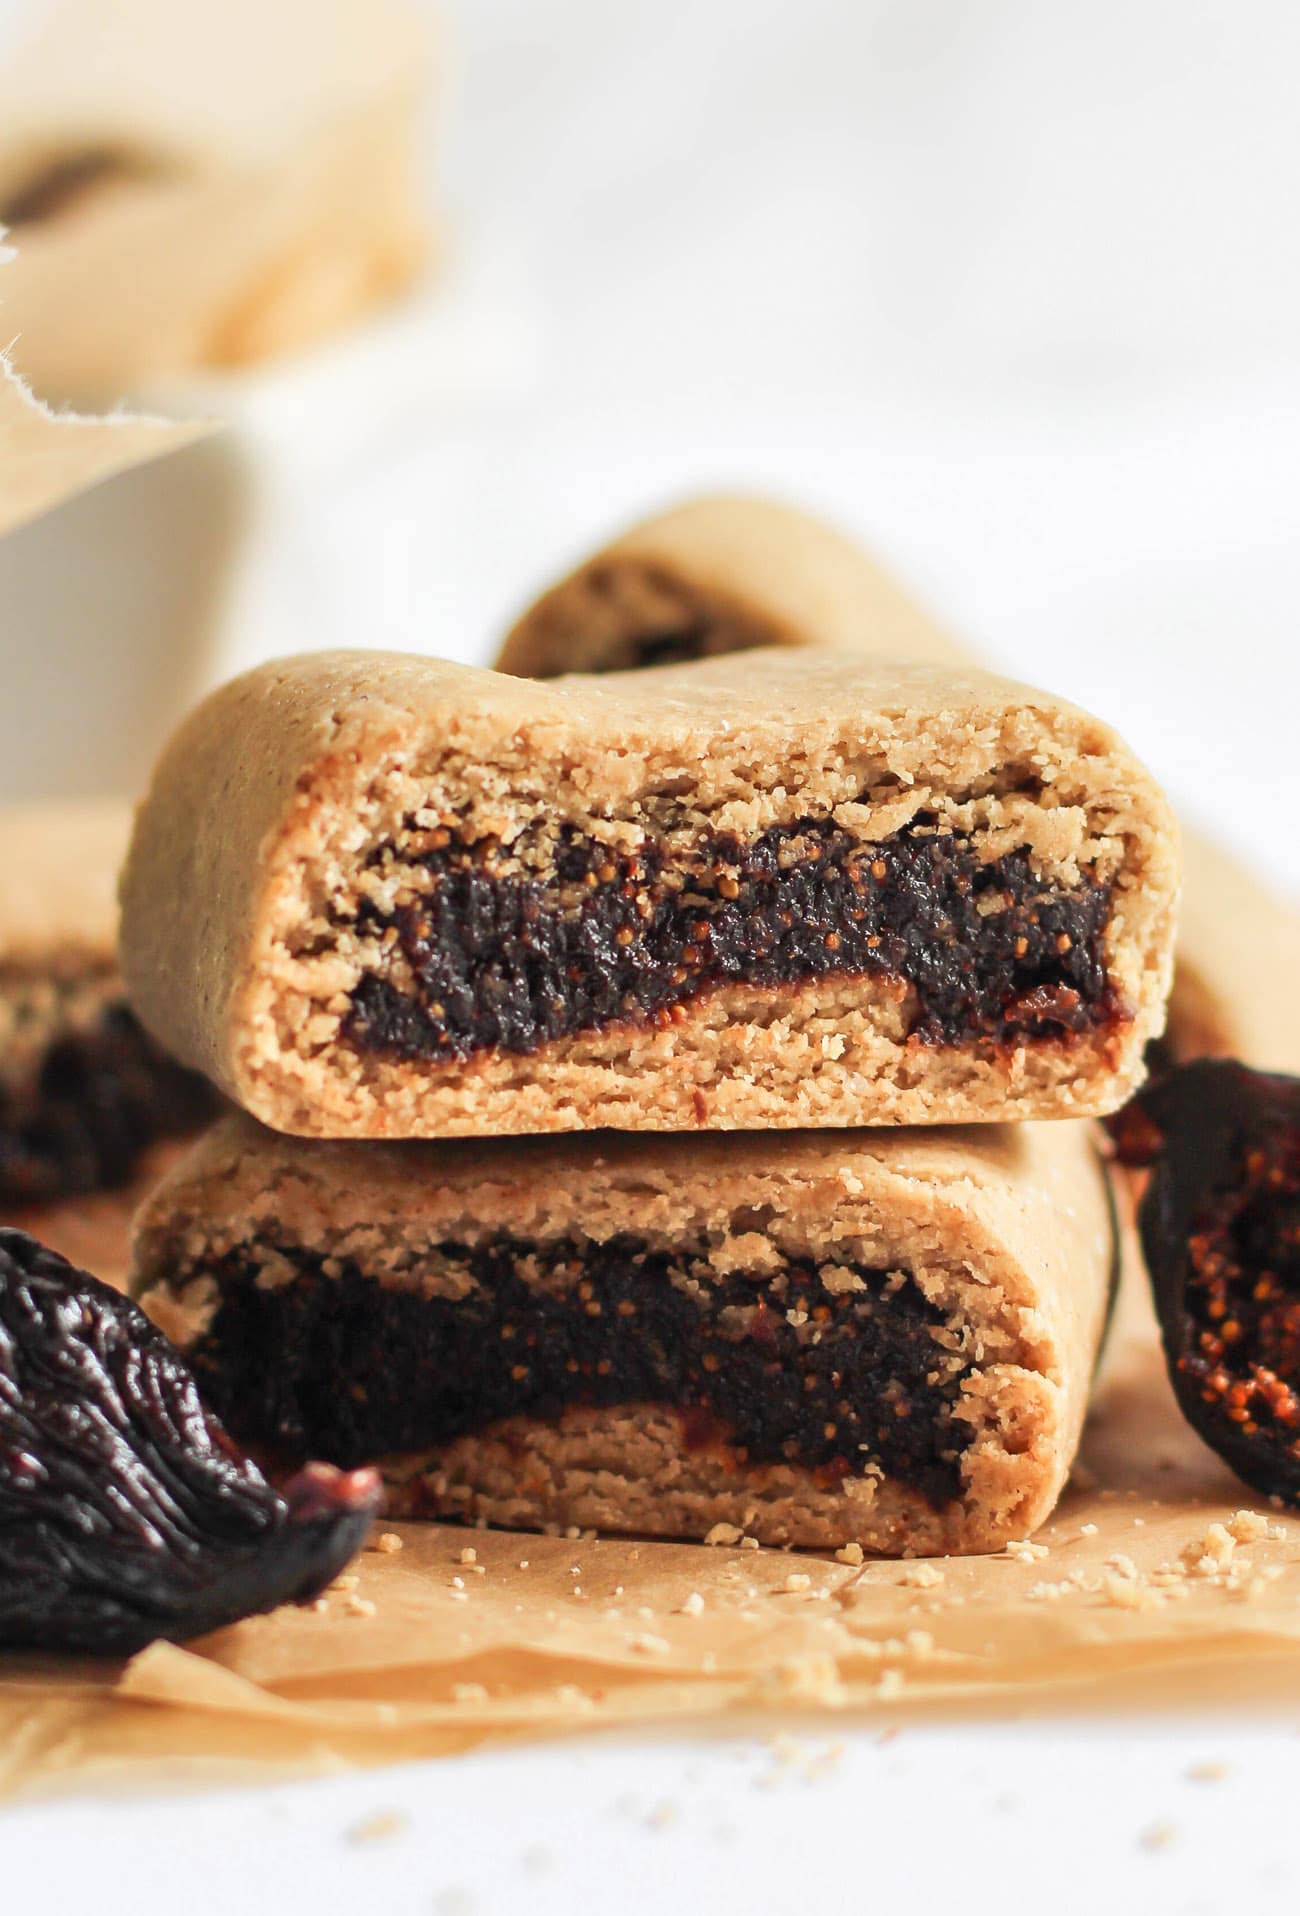 This easy Fig Newton recipe is 100% whole grain, gluten free, and vegan, with zero added sugar. Made with oat flour, dried figs, unsweetened applesauce, and a tad bit of coconut oil, these are chewy and perfectly sweet!